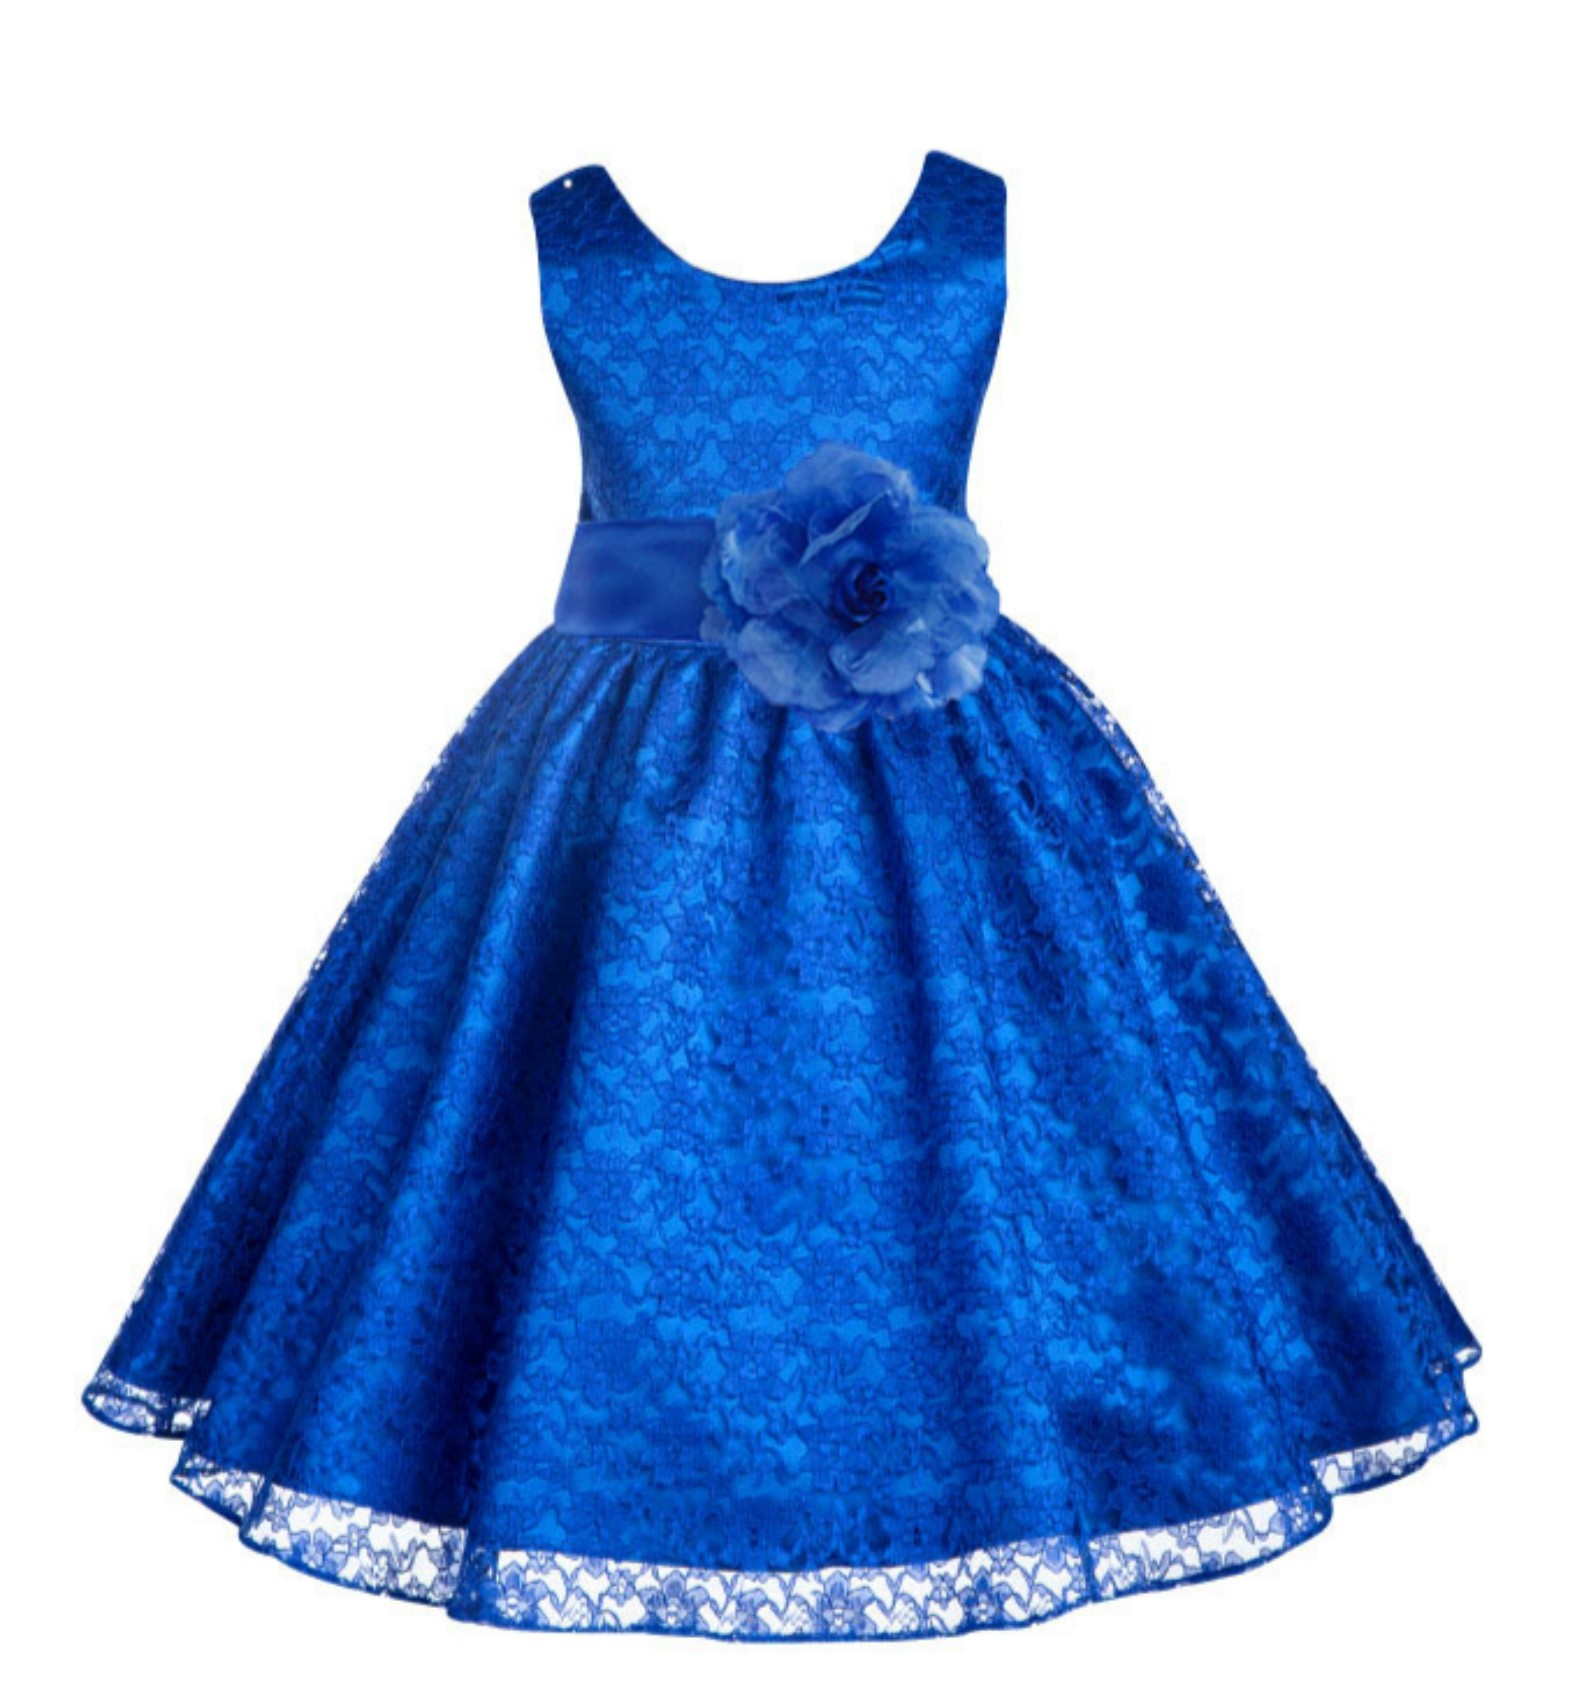 Royal Blue Floral Lace Overlay Flower Girl Dress Formal Beauty 163S